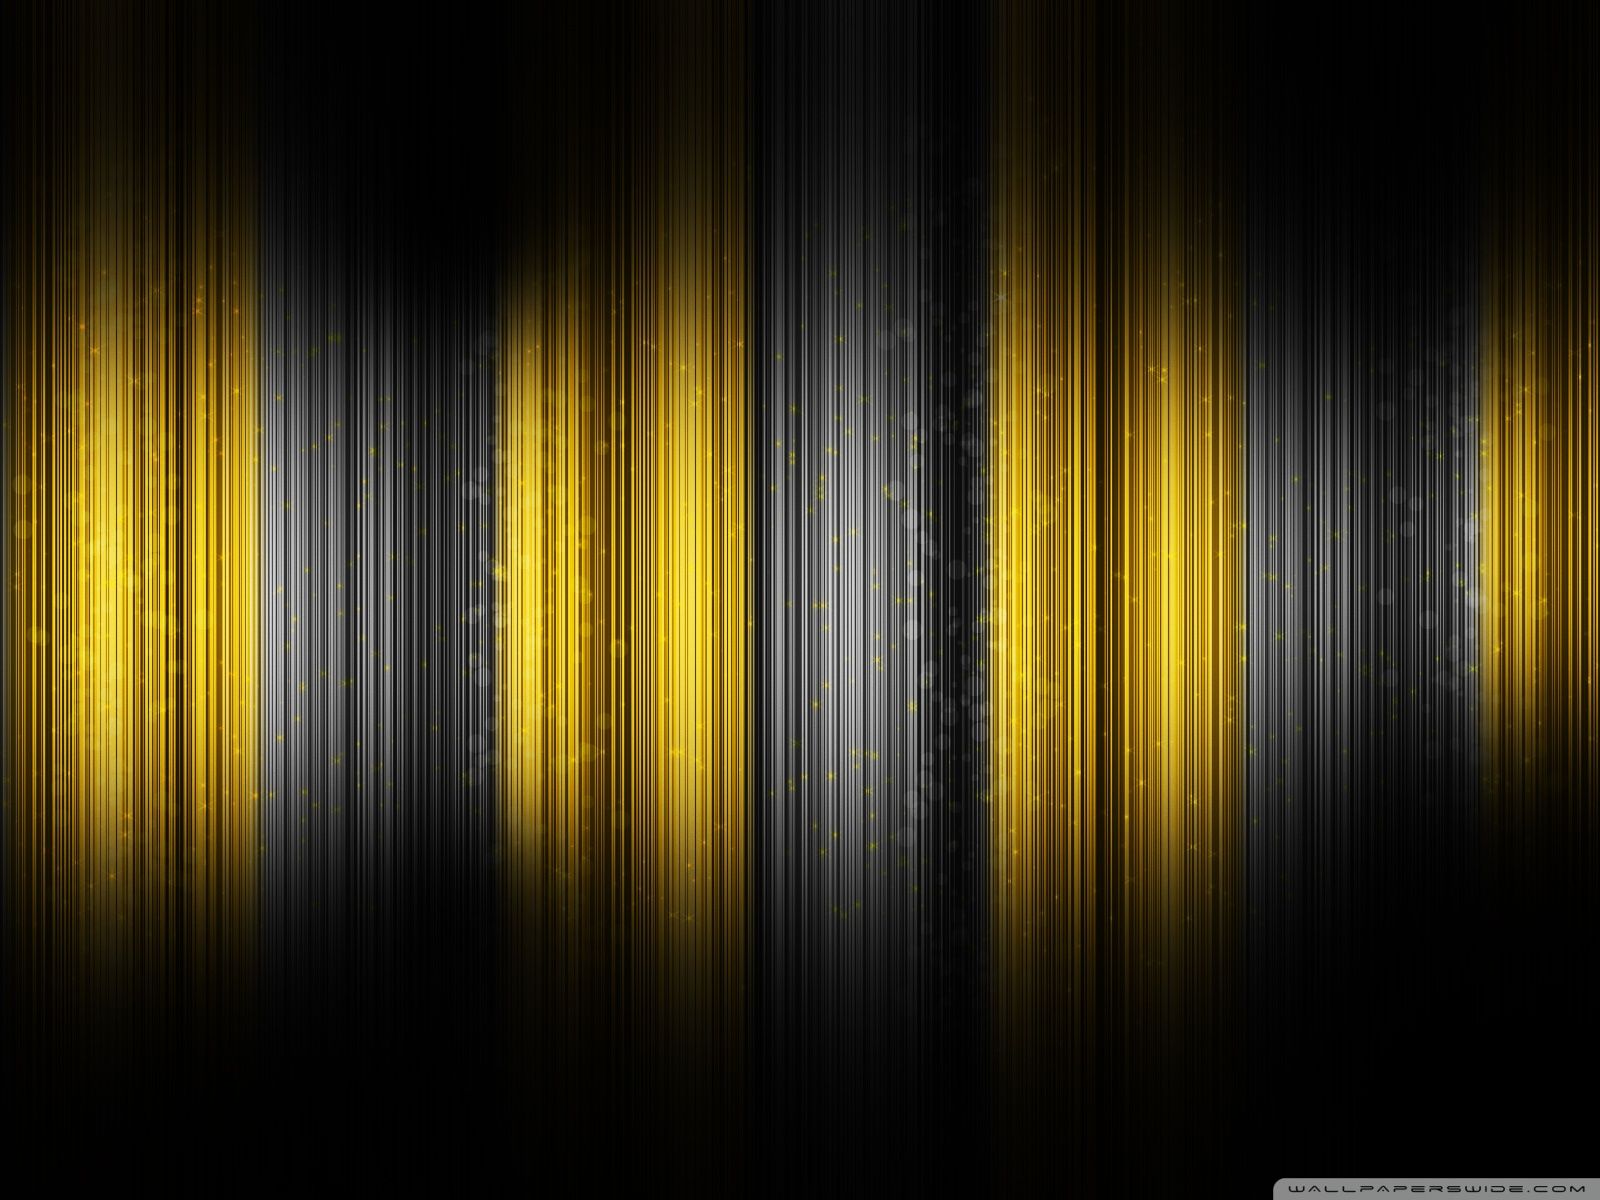 Black And Yellow Abstract Ultra HD Desktop Background Wallpaper for 4K UHD TV, Tablet